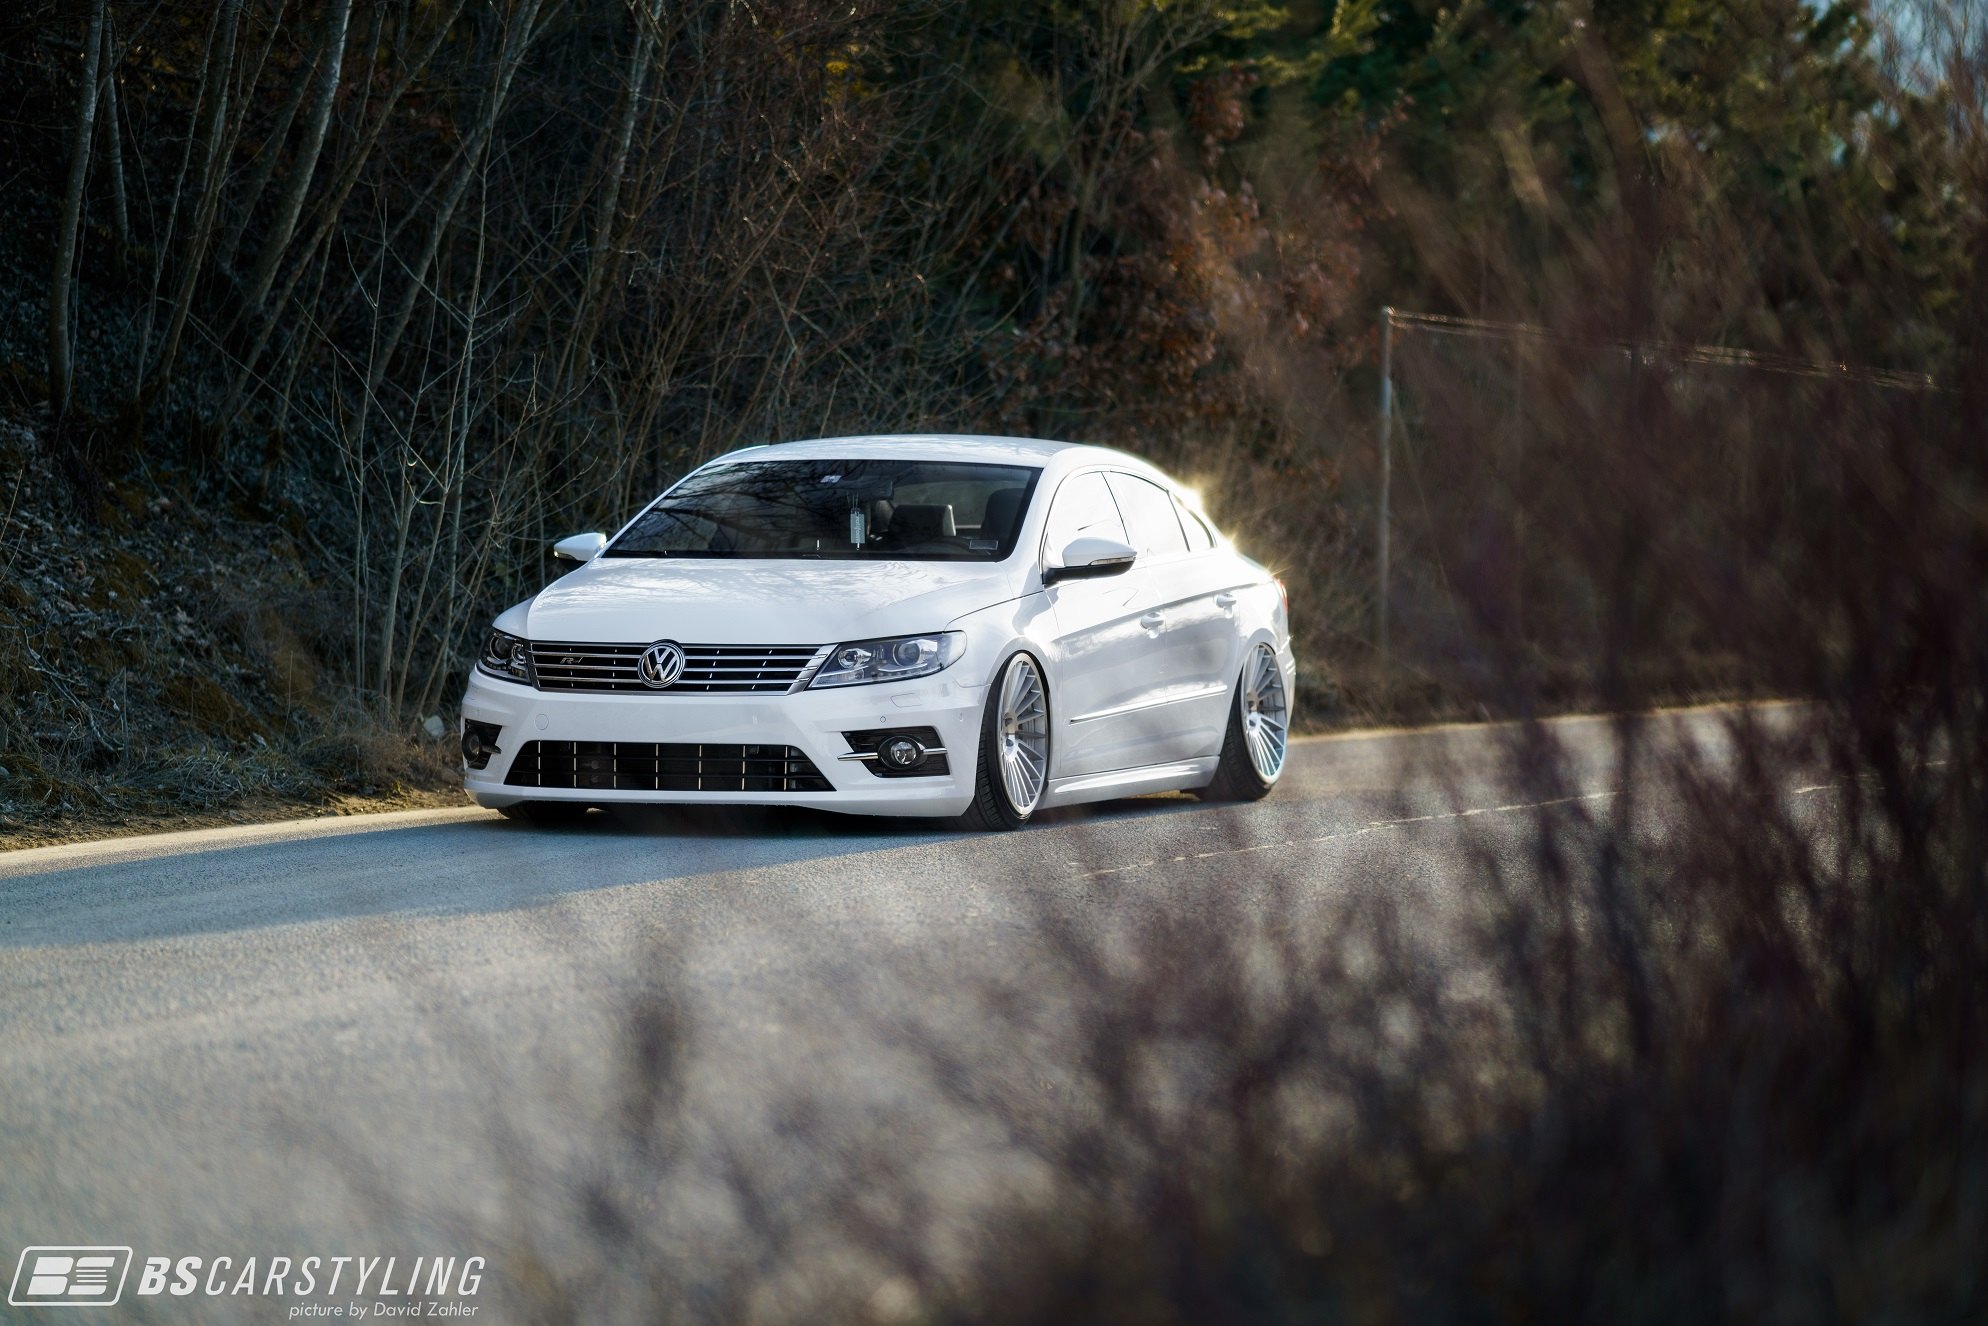 Front Bumper with Fog Lights on White VW CC - Photo by Rotiform